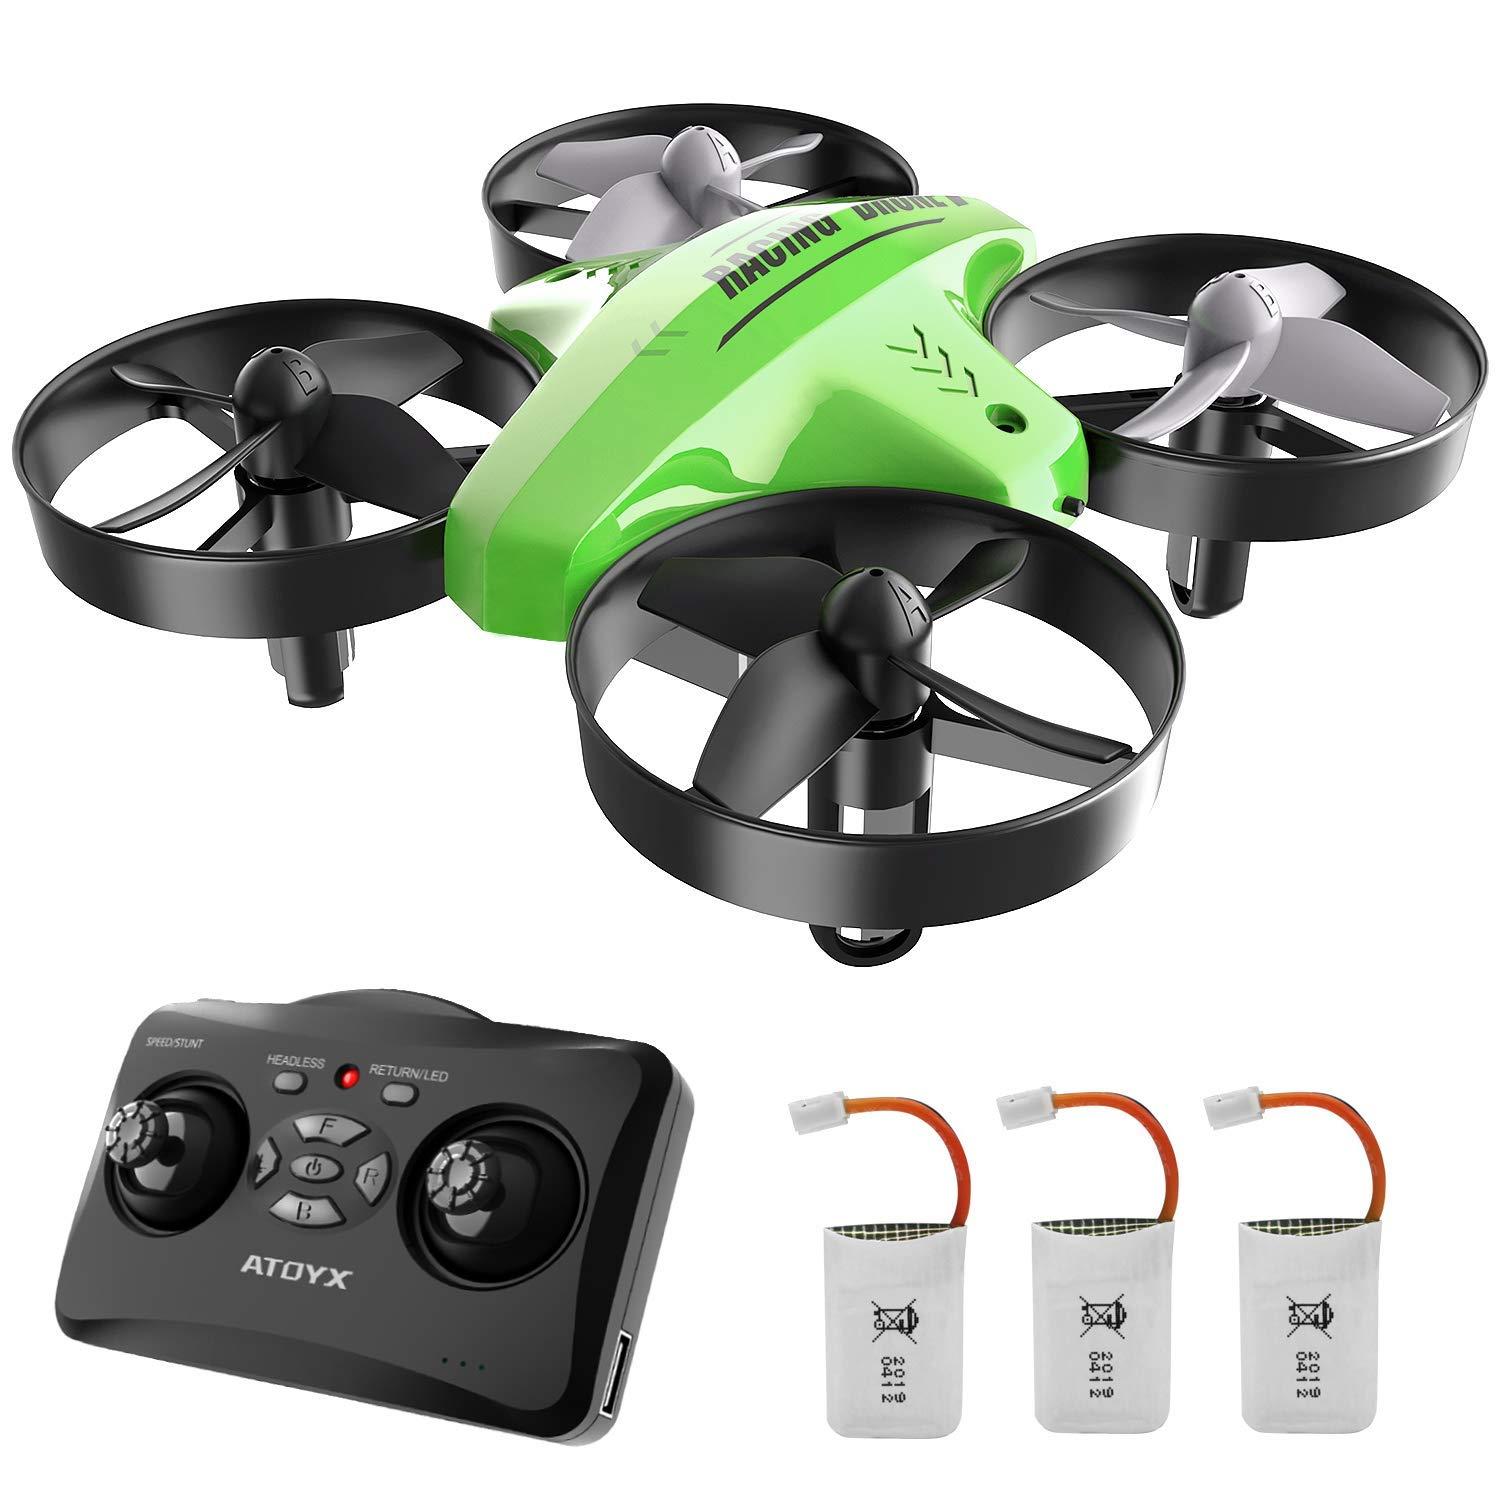 Remote Control Helicopter From Amazon: Consider These Factors Before Purchasing a Mini Drone on Amazon